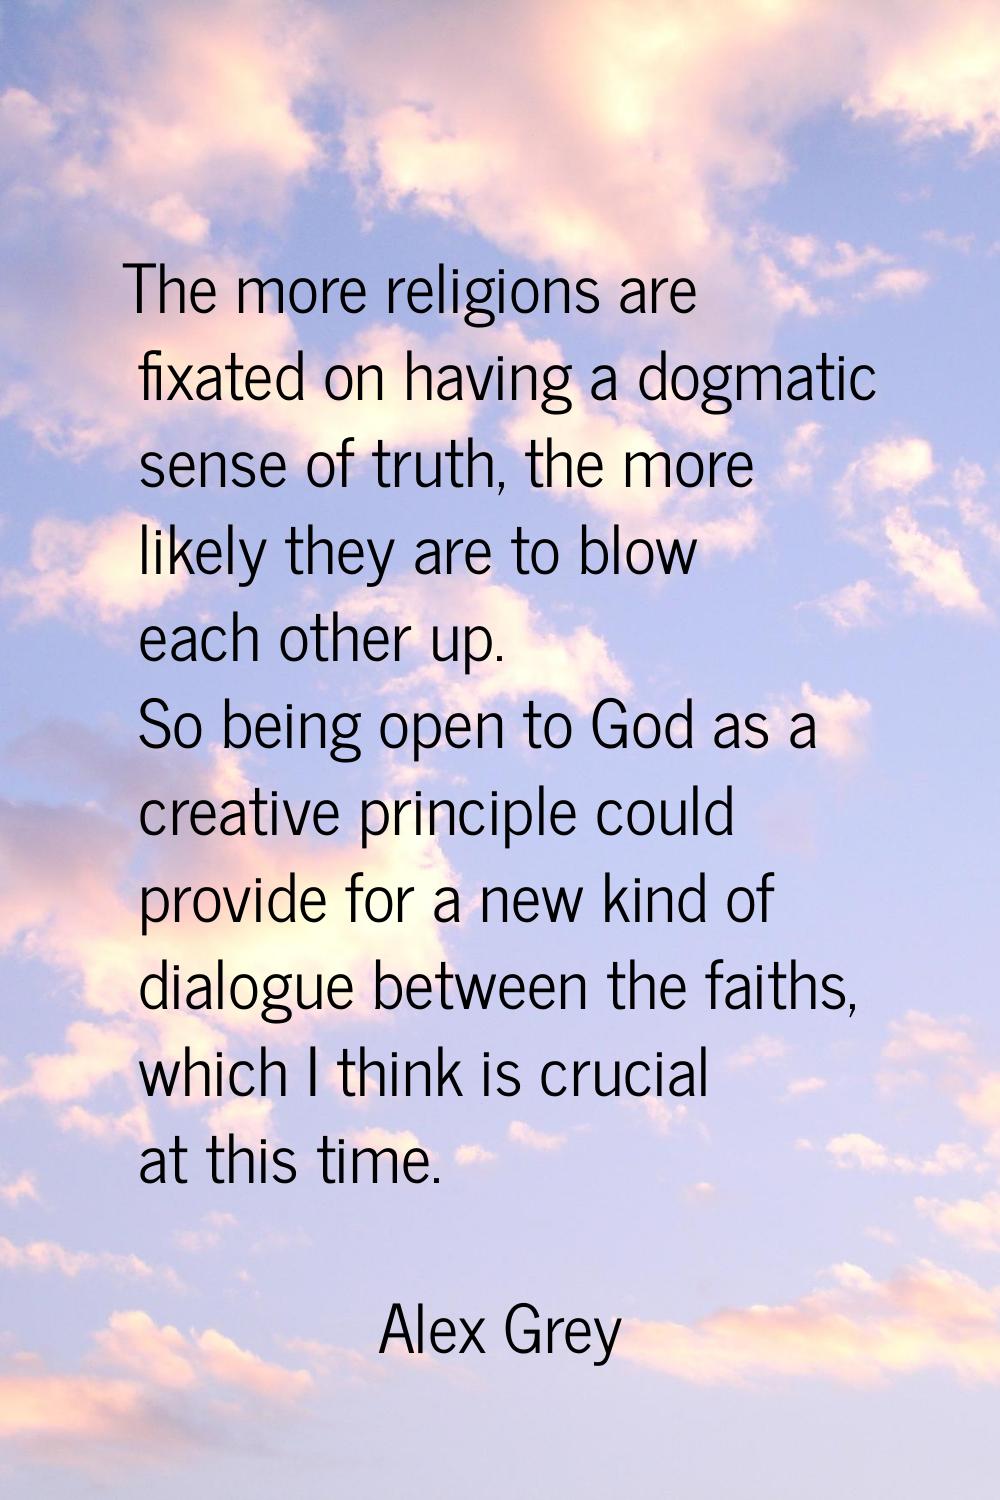 The more religions are fixated on having a dogmatic sense of truth, the more likely they are to blo